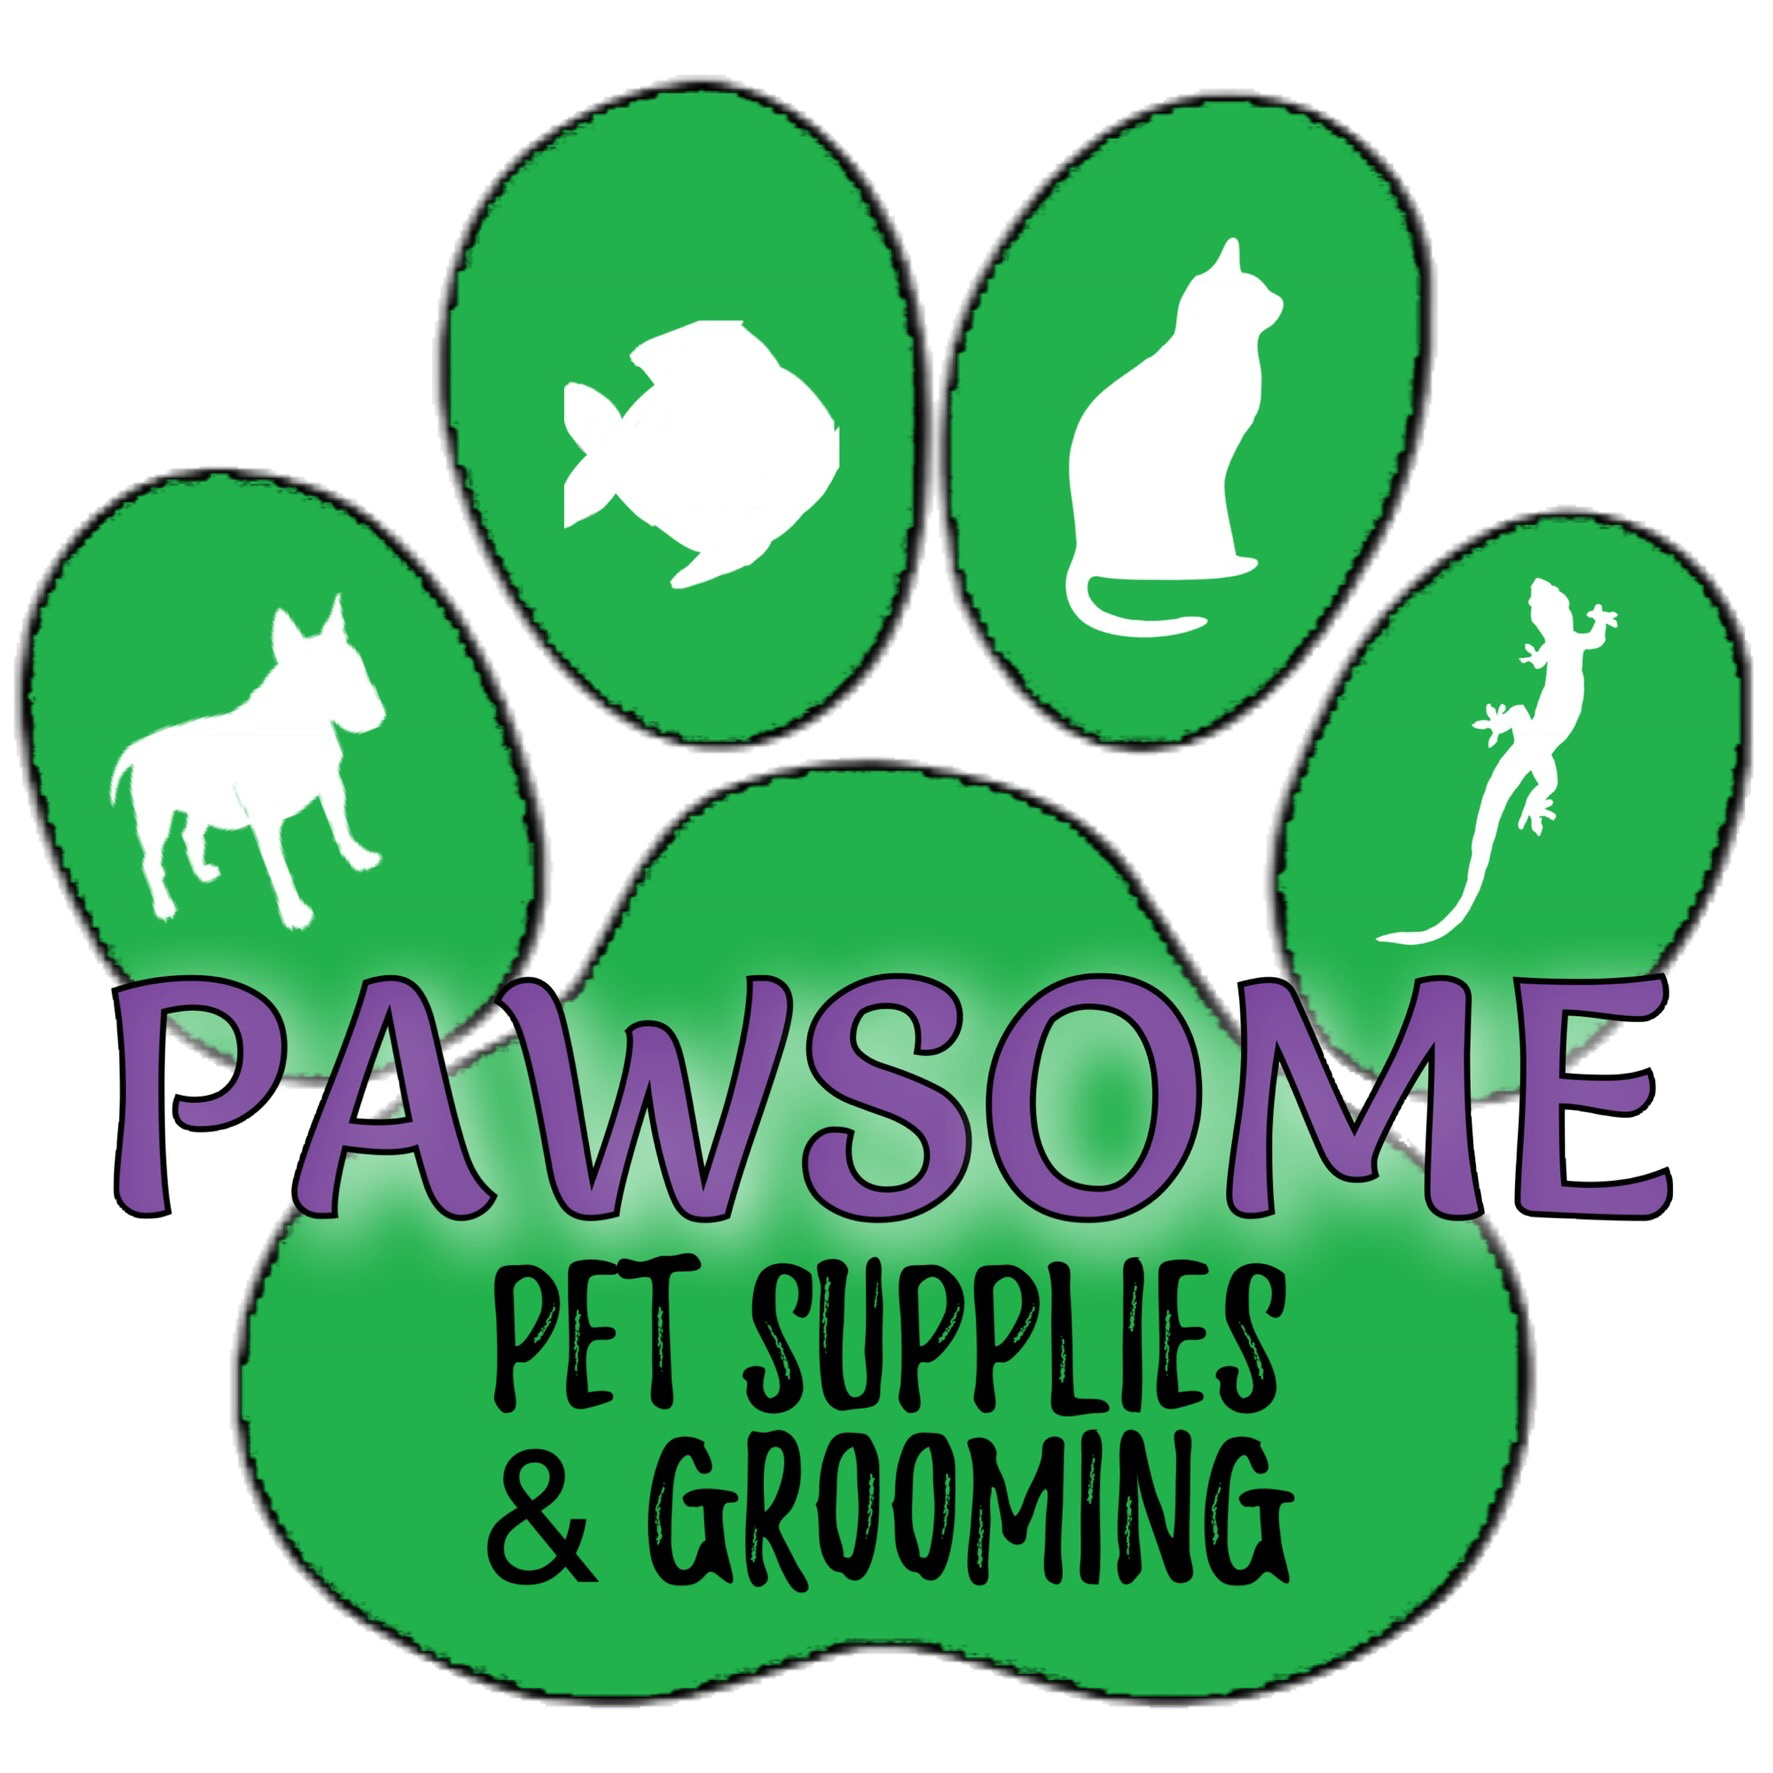 Pawsome Pet Supplies & Grooming Photo